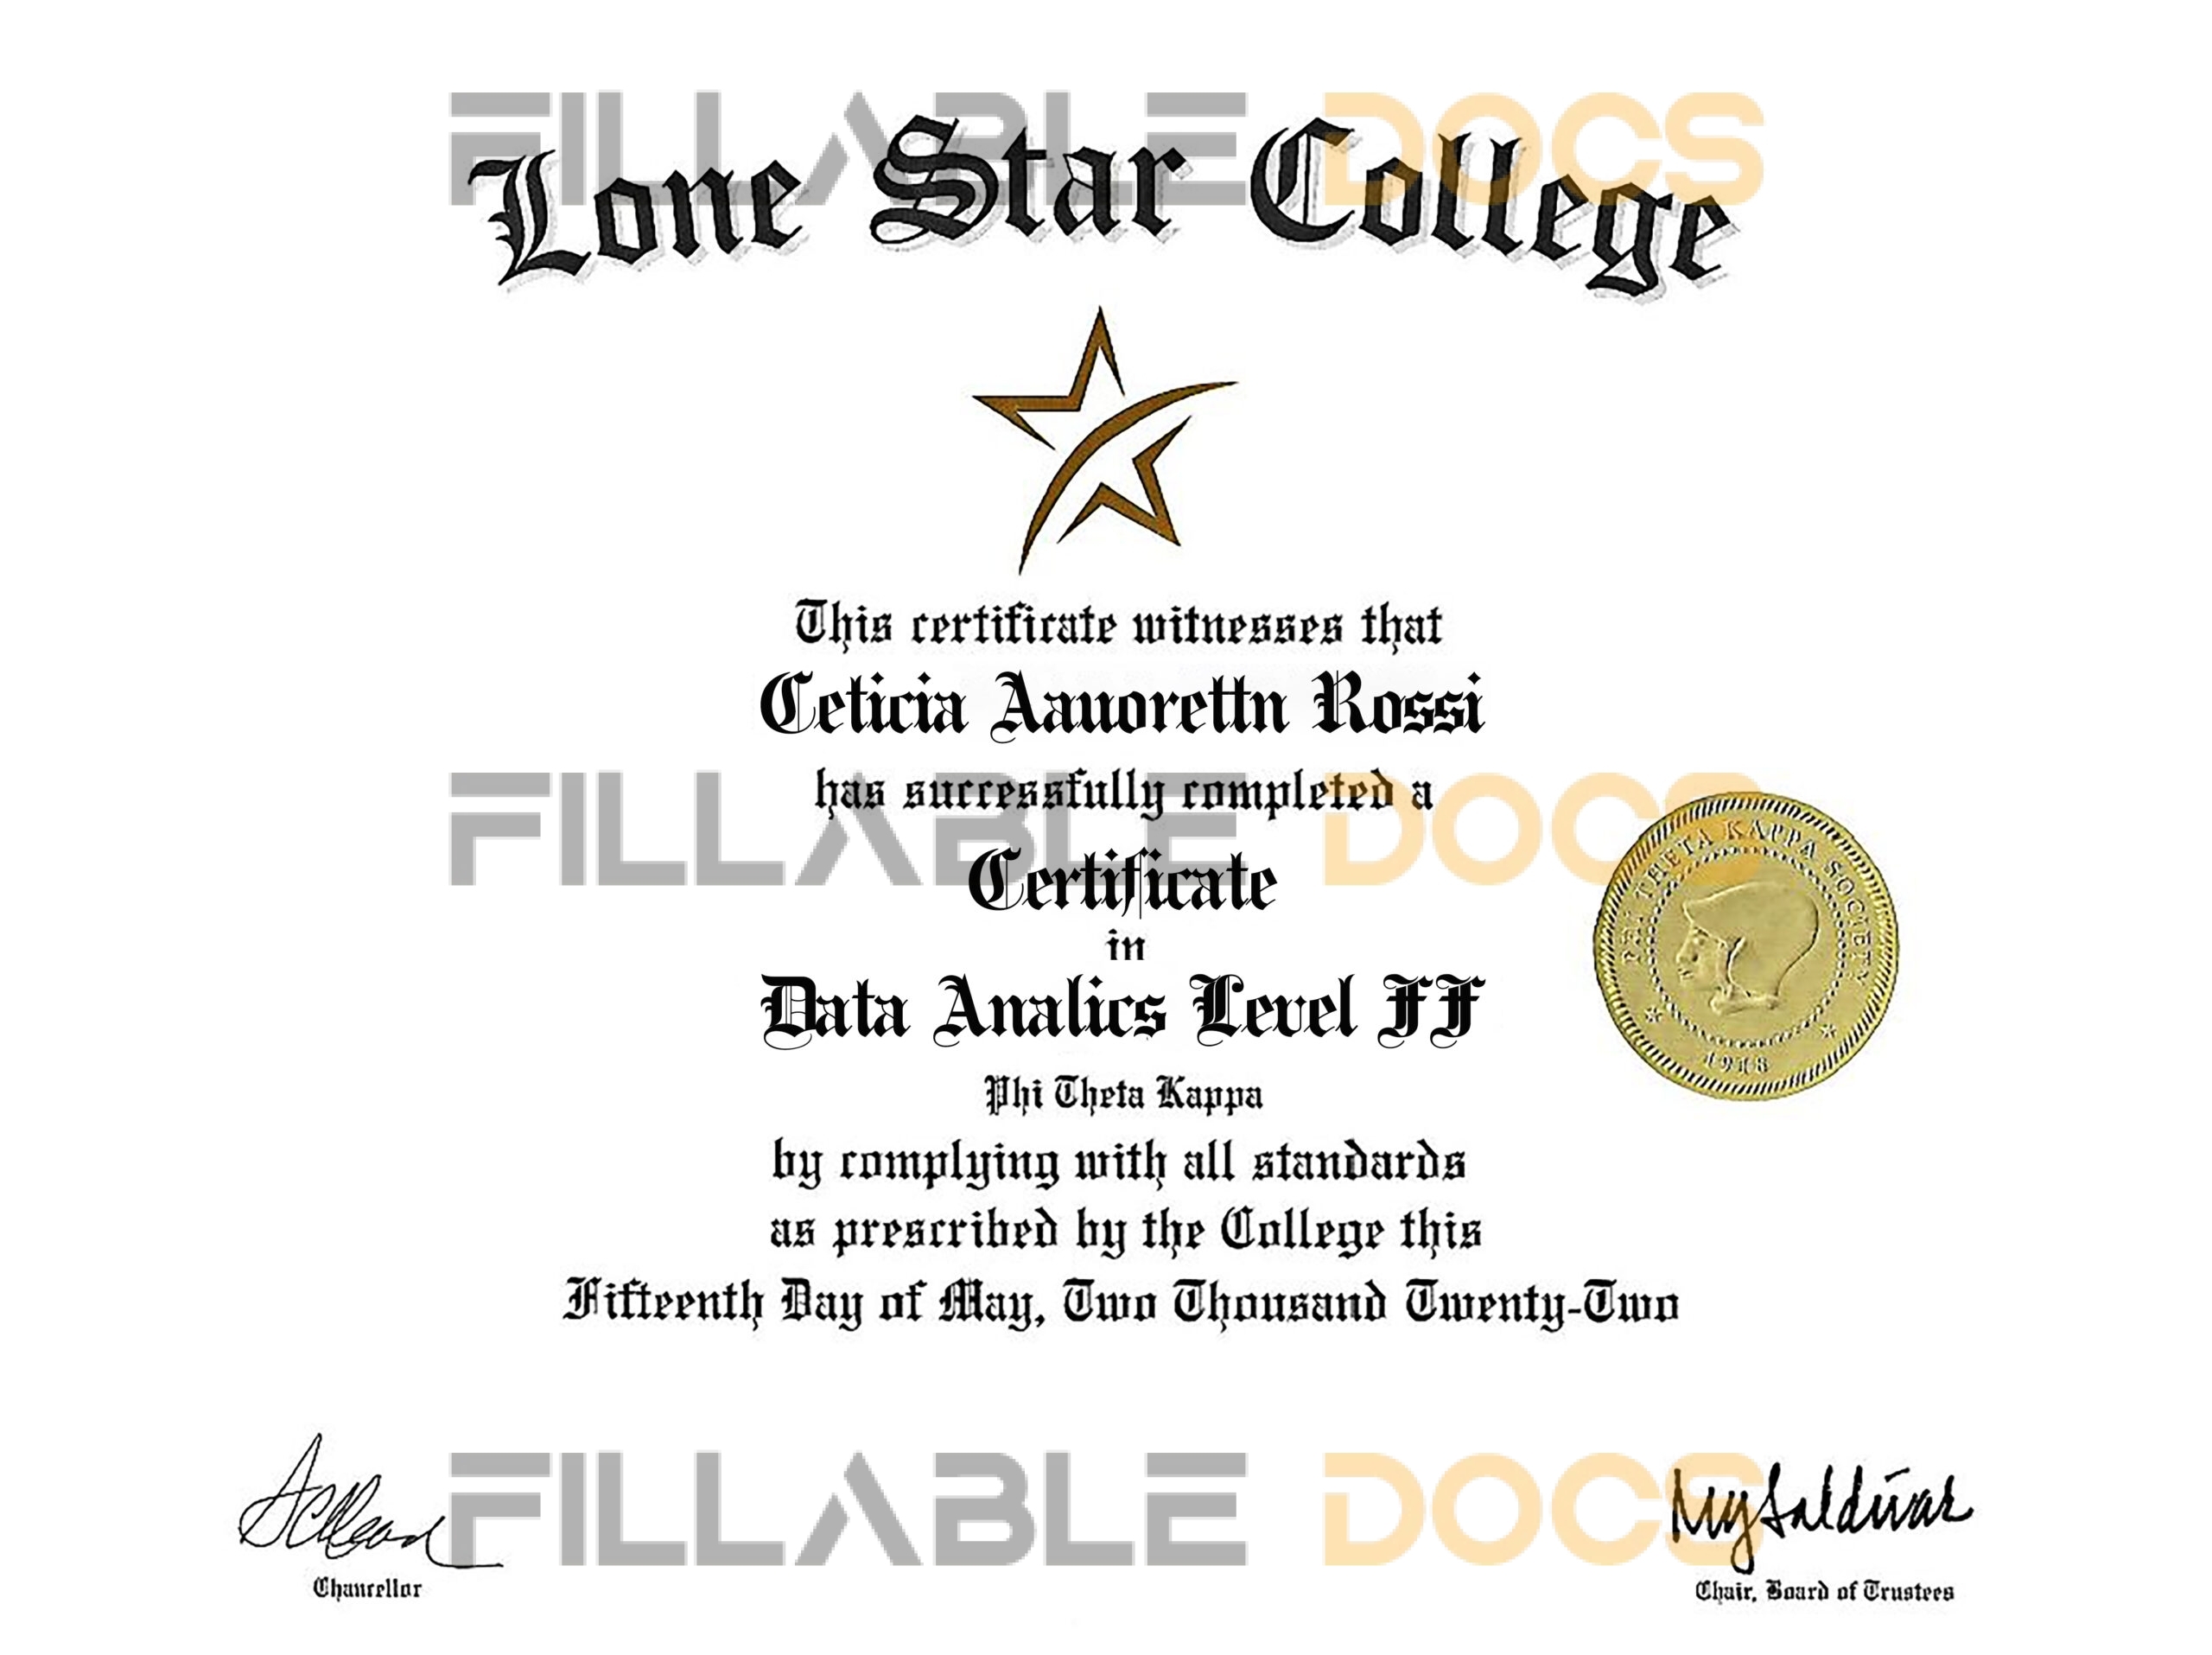 Authentic-Looking Fake Certificate from Lone Star College